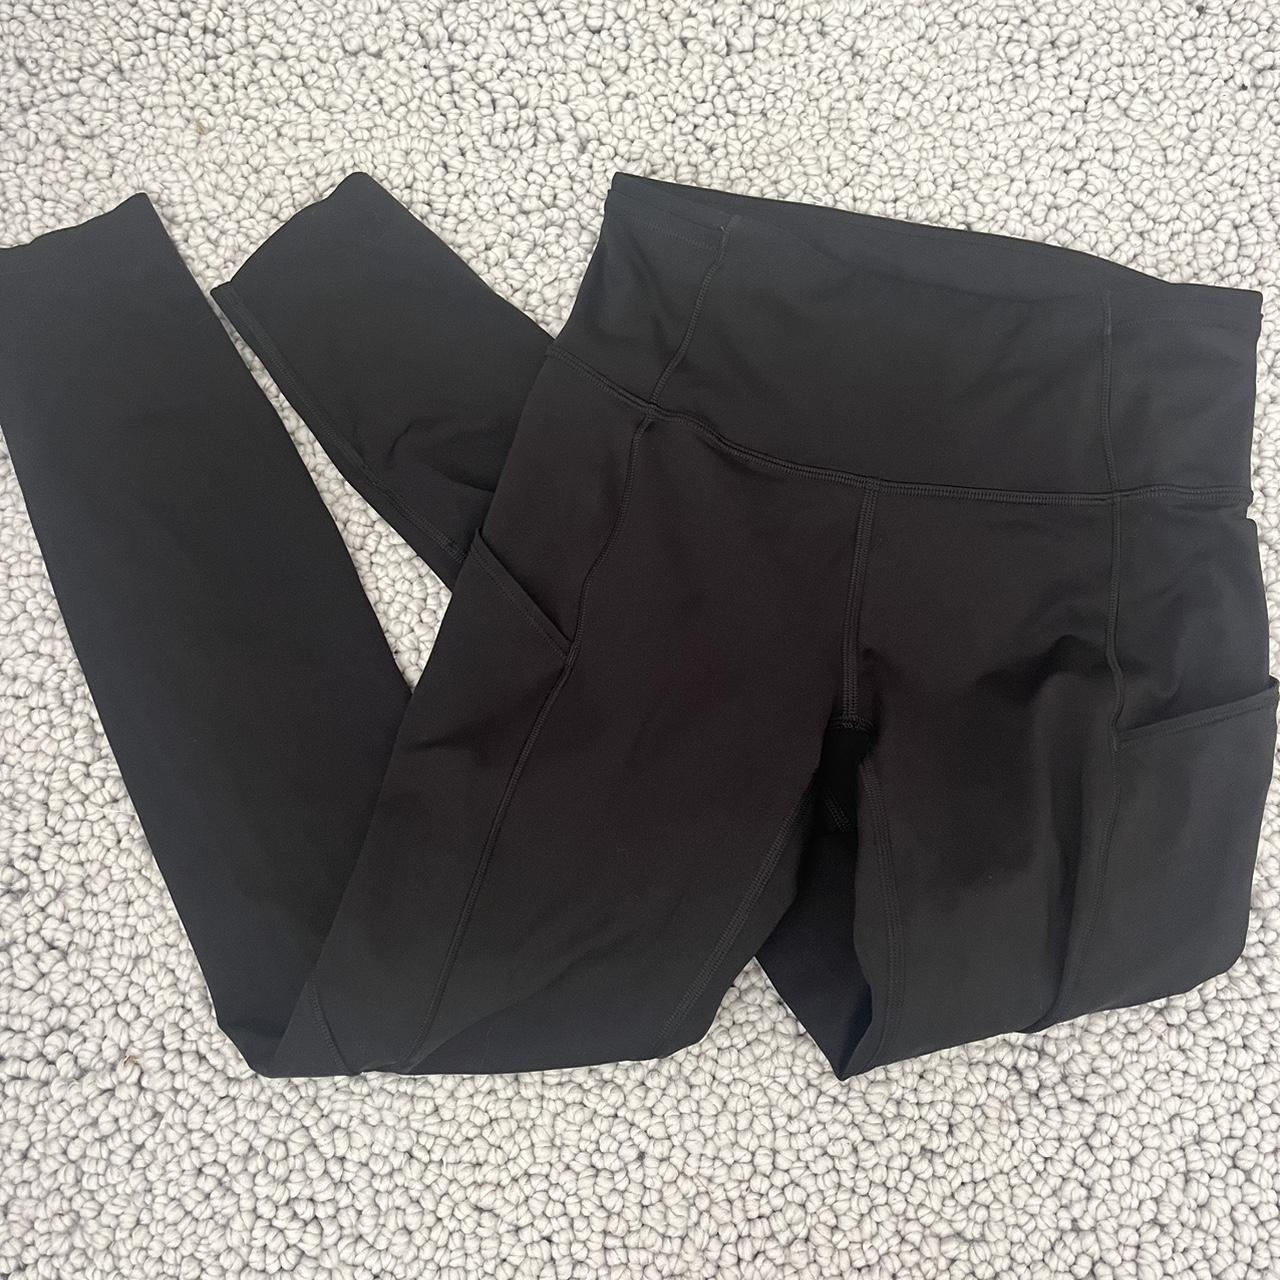 LULULEMON LEGGINGS, with wide pocket for your